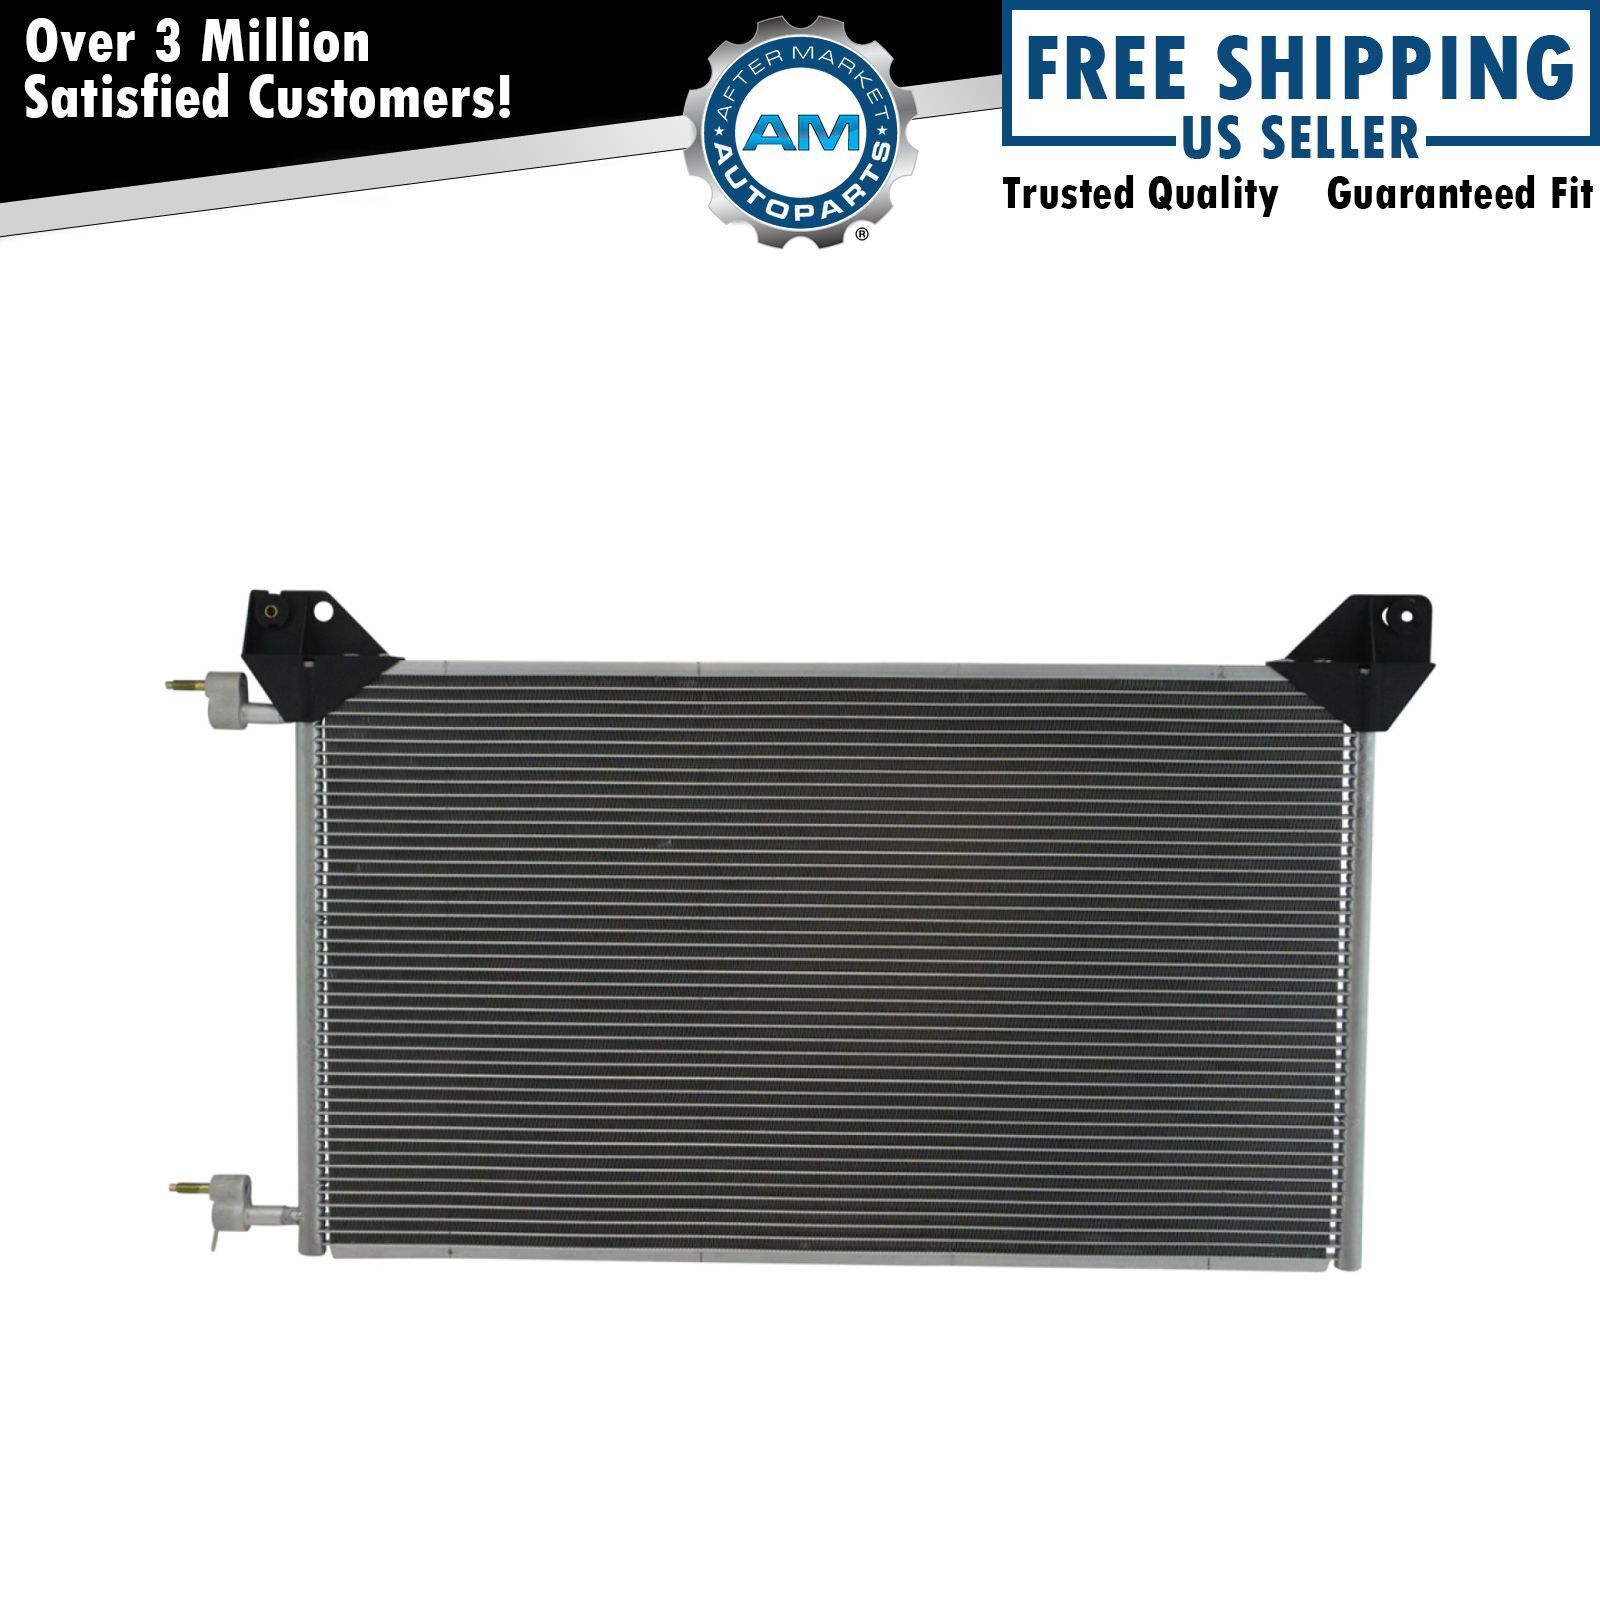 AC Condenser A/C Air Conditioning for Chevy GMC Cadillac Pickup Truck SUV New